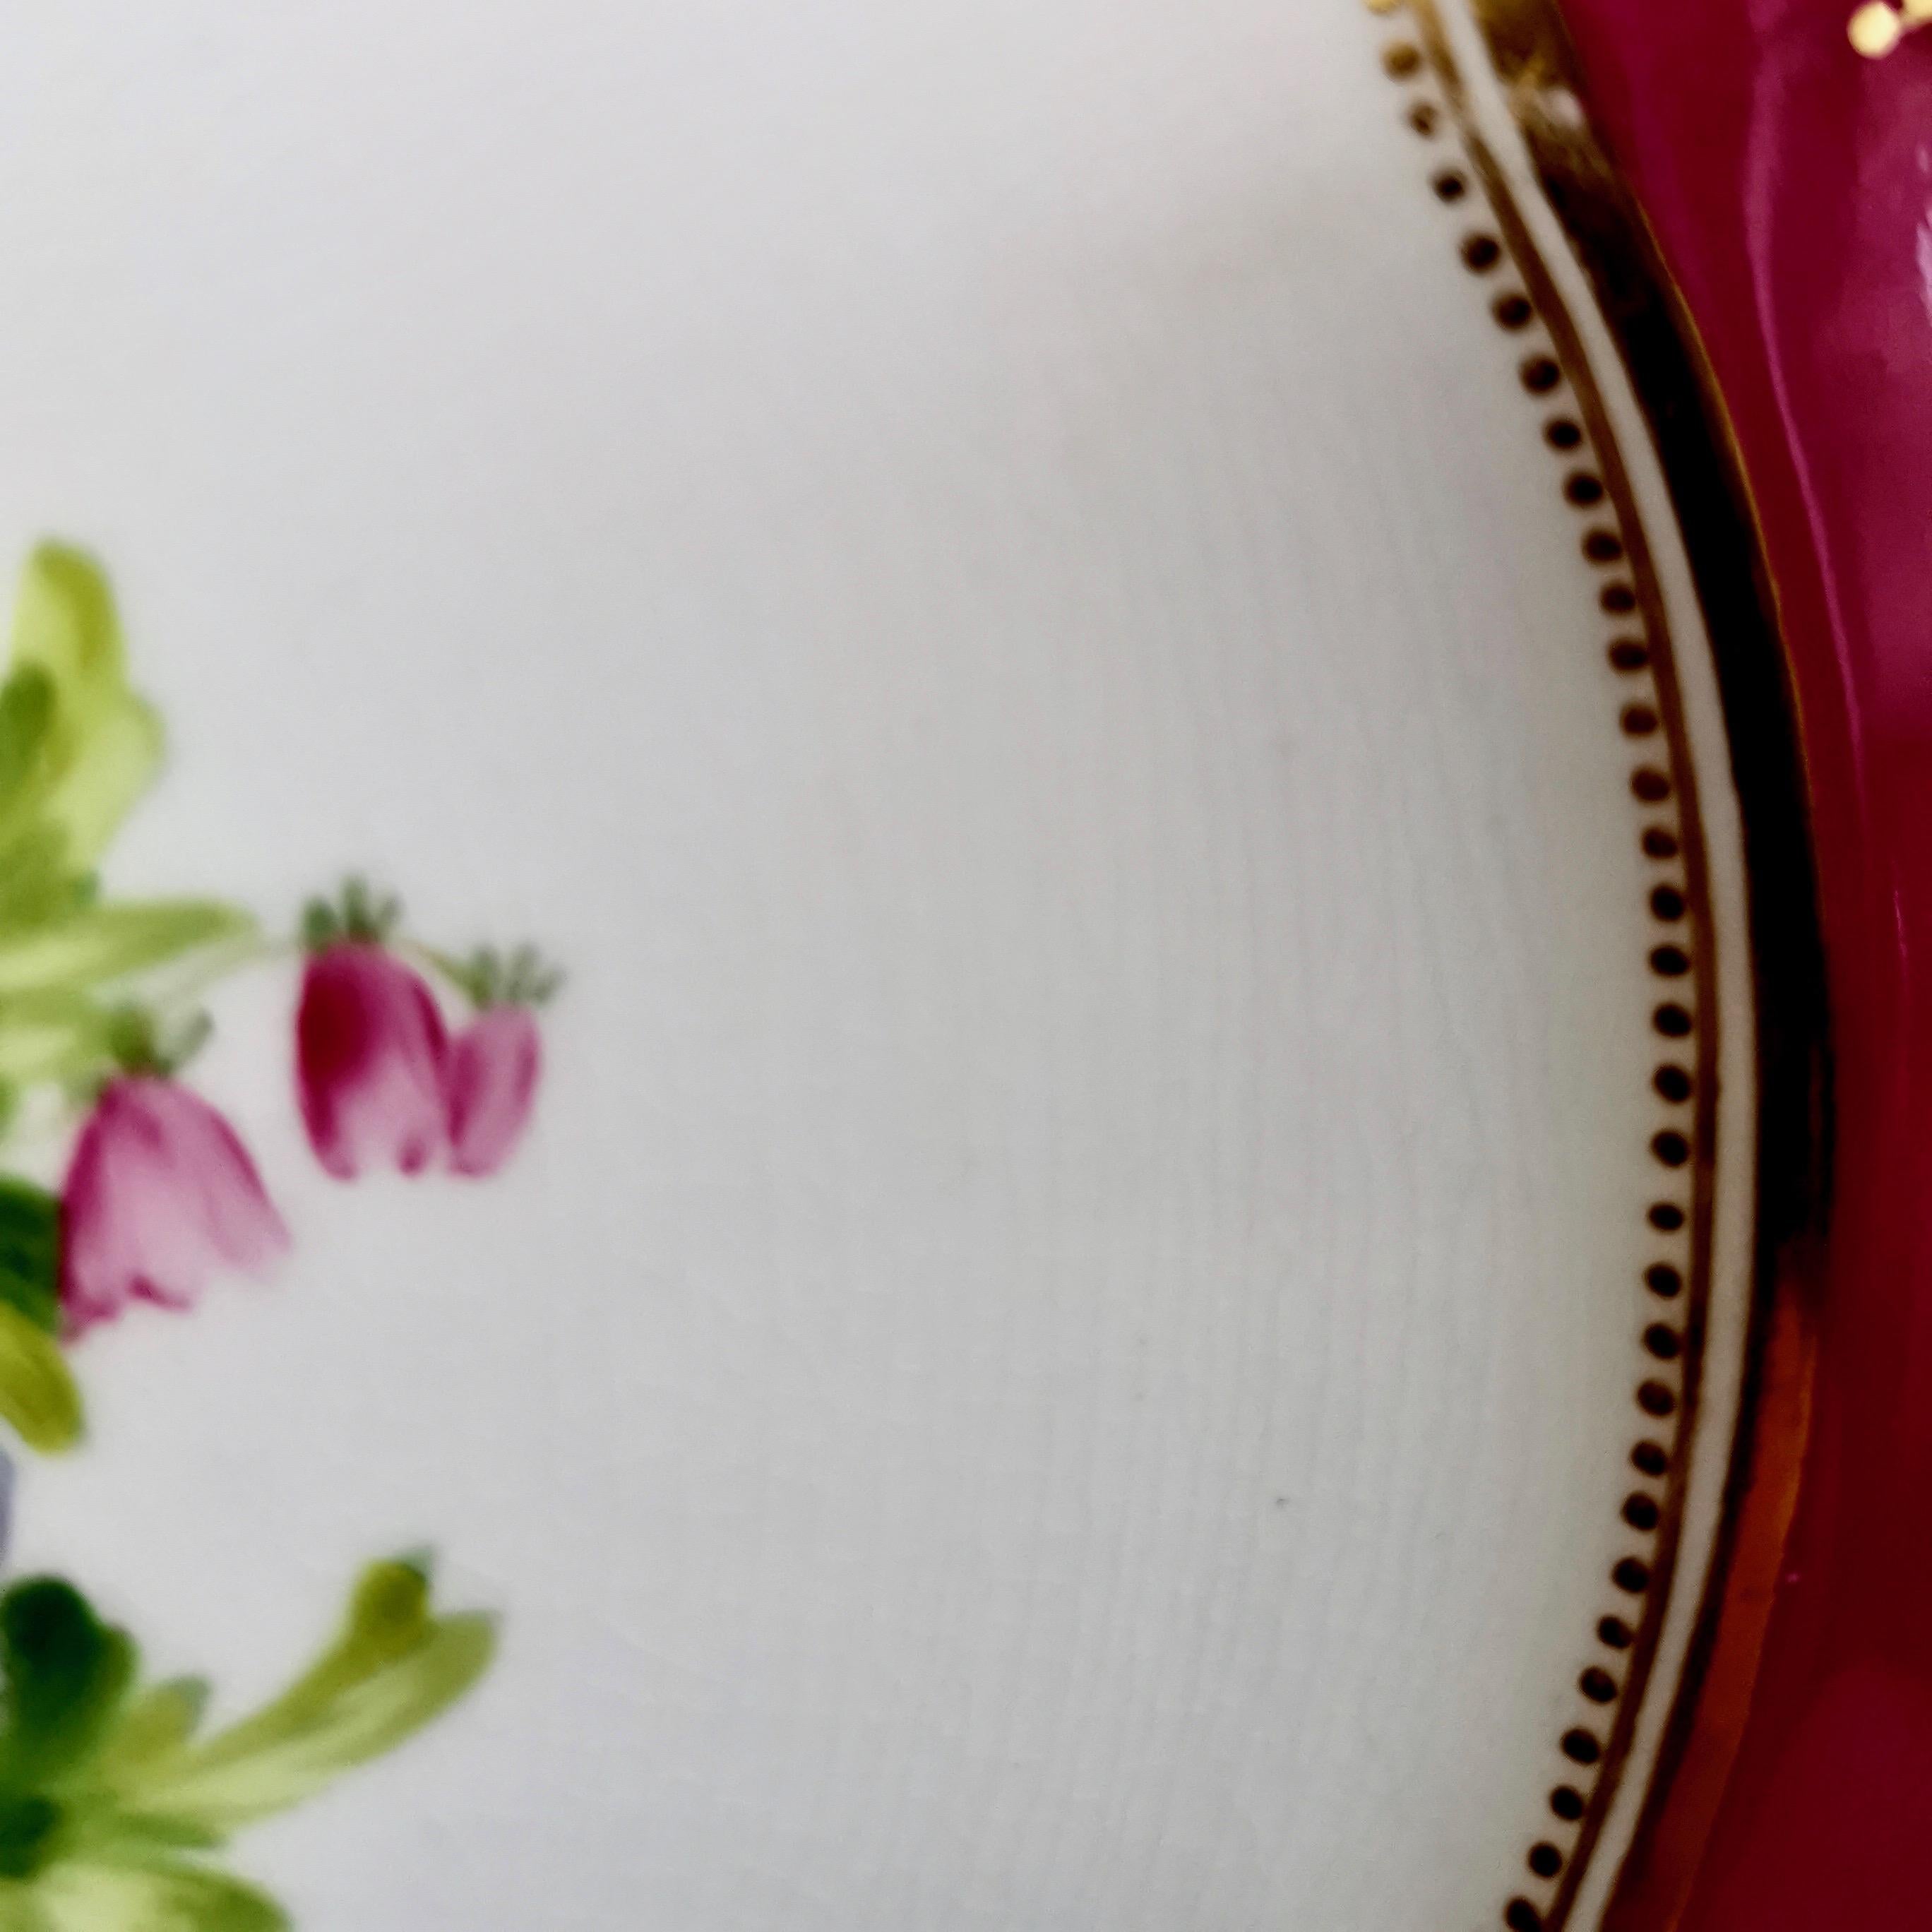 Hand-Painted Coalport Porcelain Plate, Maroon with Flowers by Thomas Dixon, circa 1860